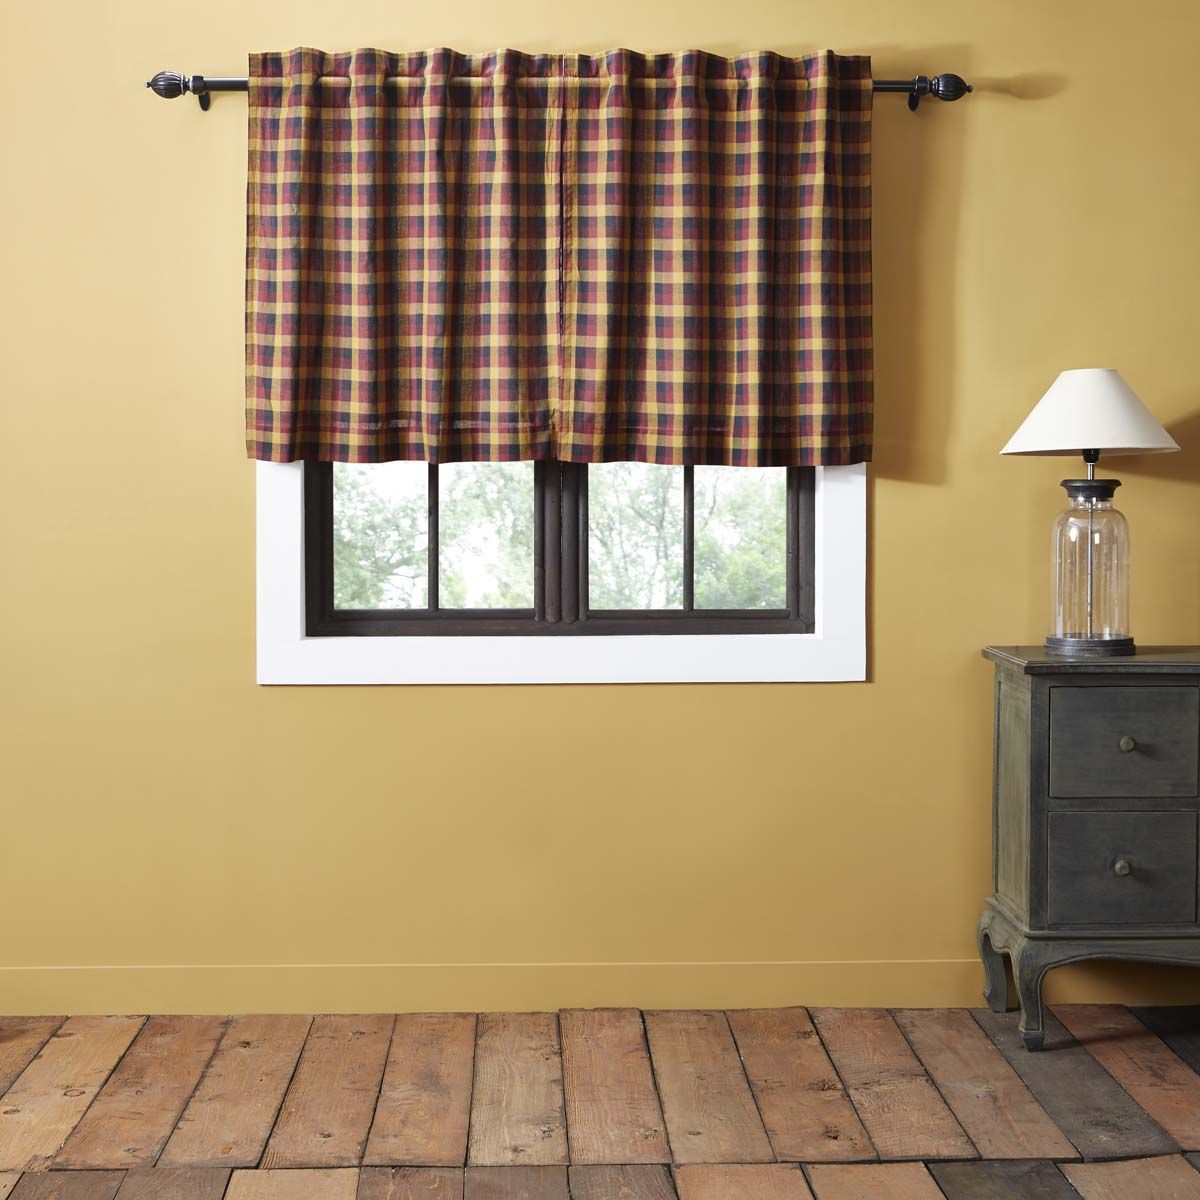 Deep Burgundy Red Primitive Kitchen Curtains Settlement Rod Pocket Cotton  Hanging Loops Plaid 36x36 Tier Pair Pertaining To Red Primitive Kitchen Curtains (View 15 of 20)